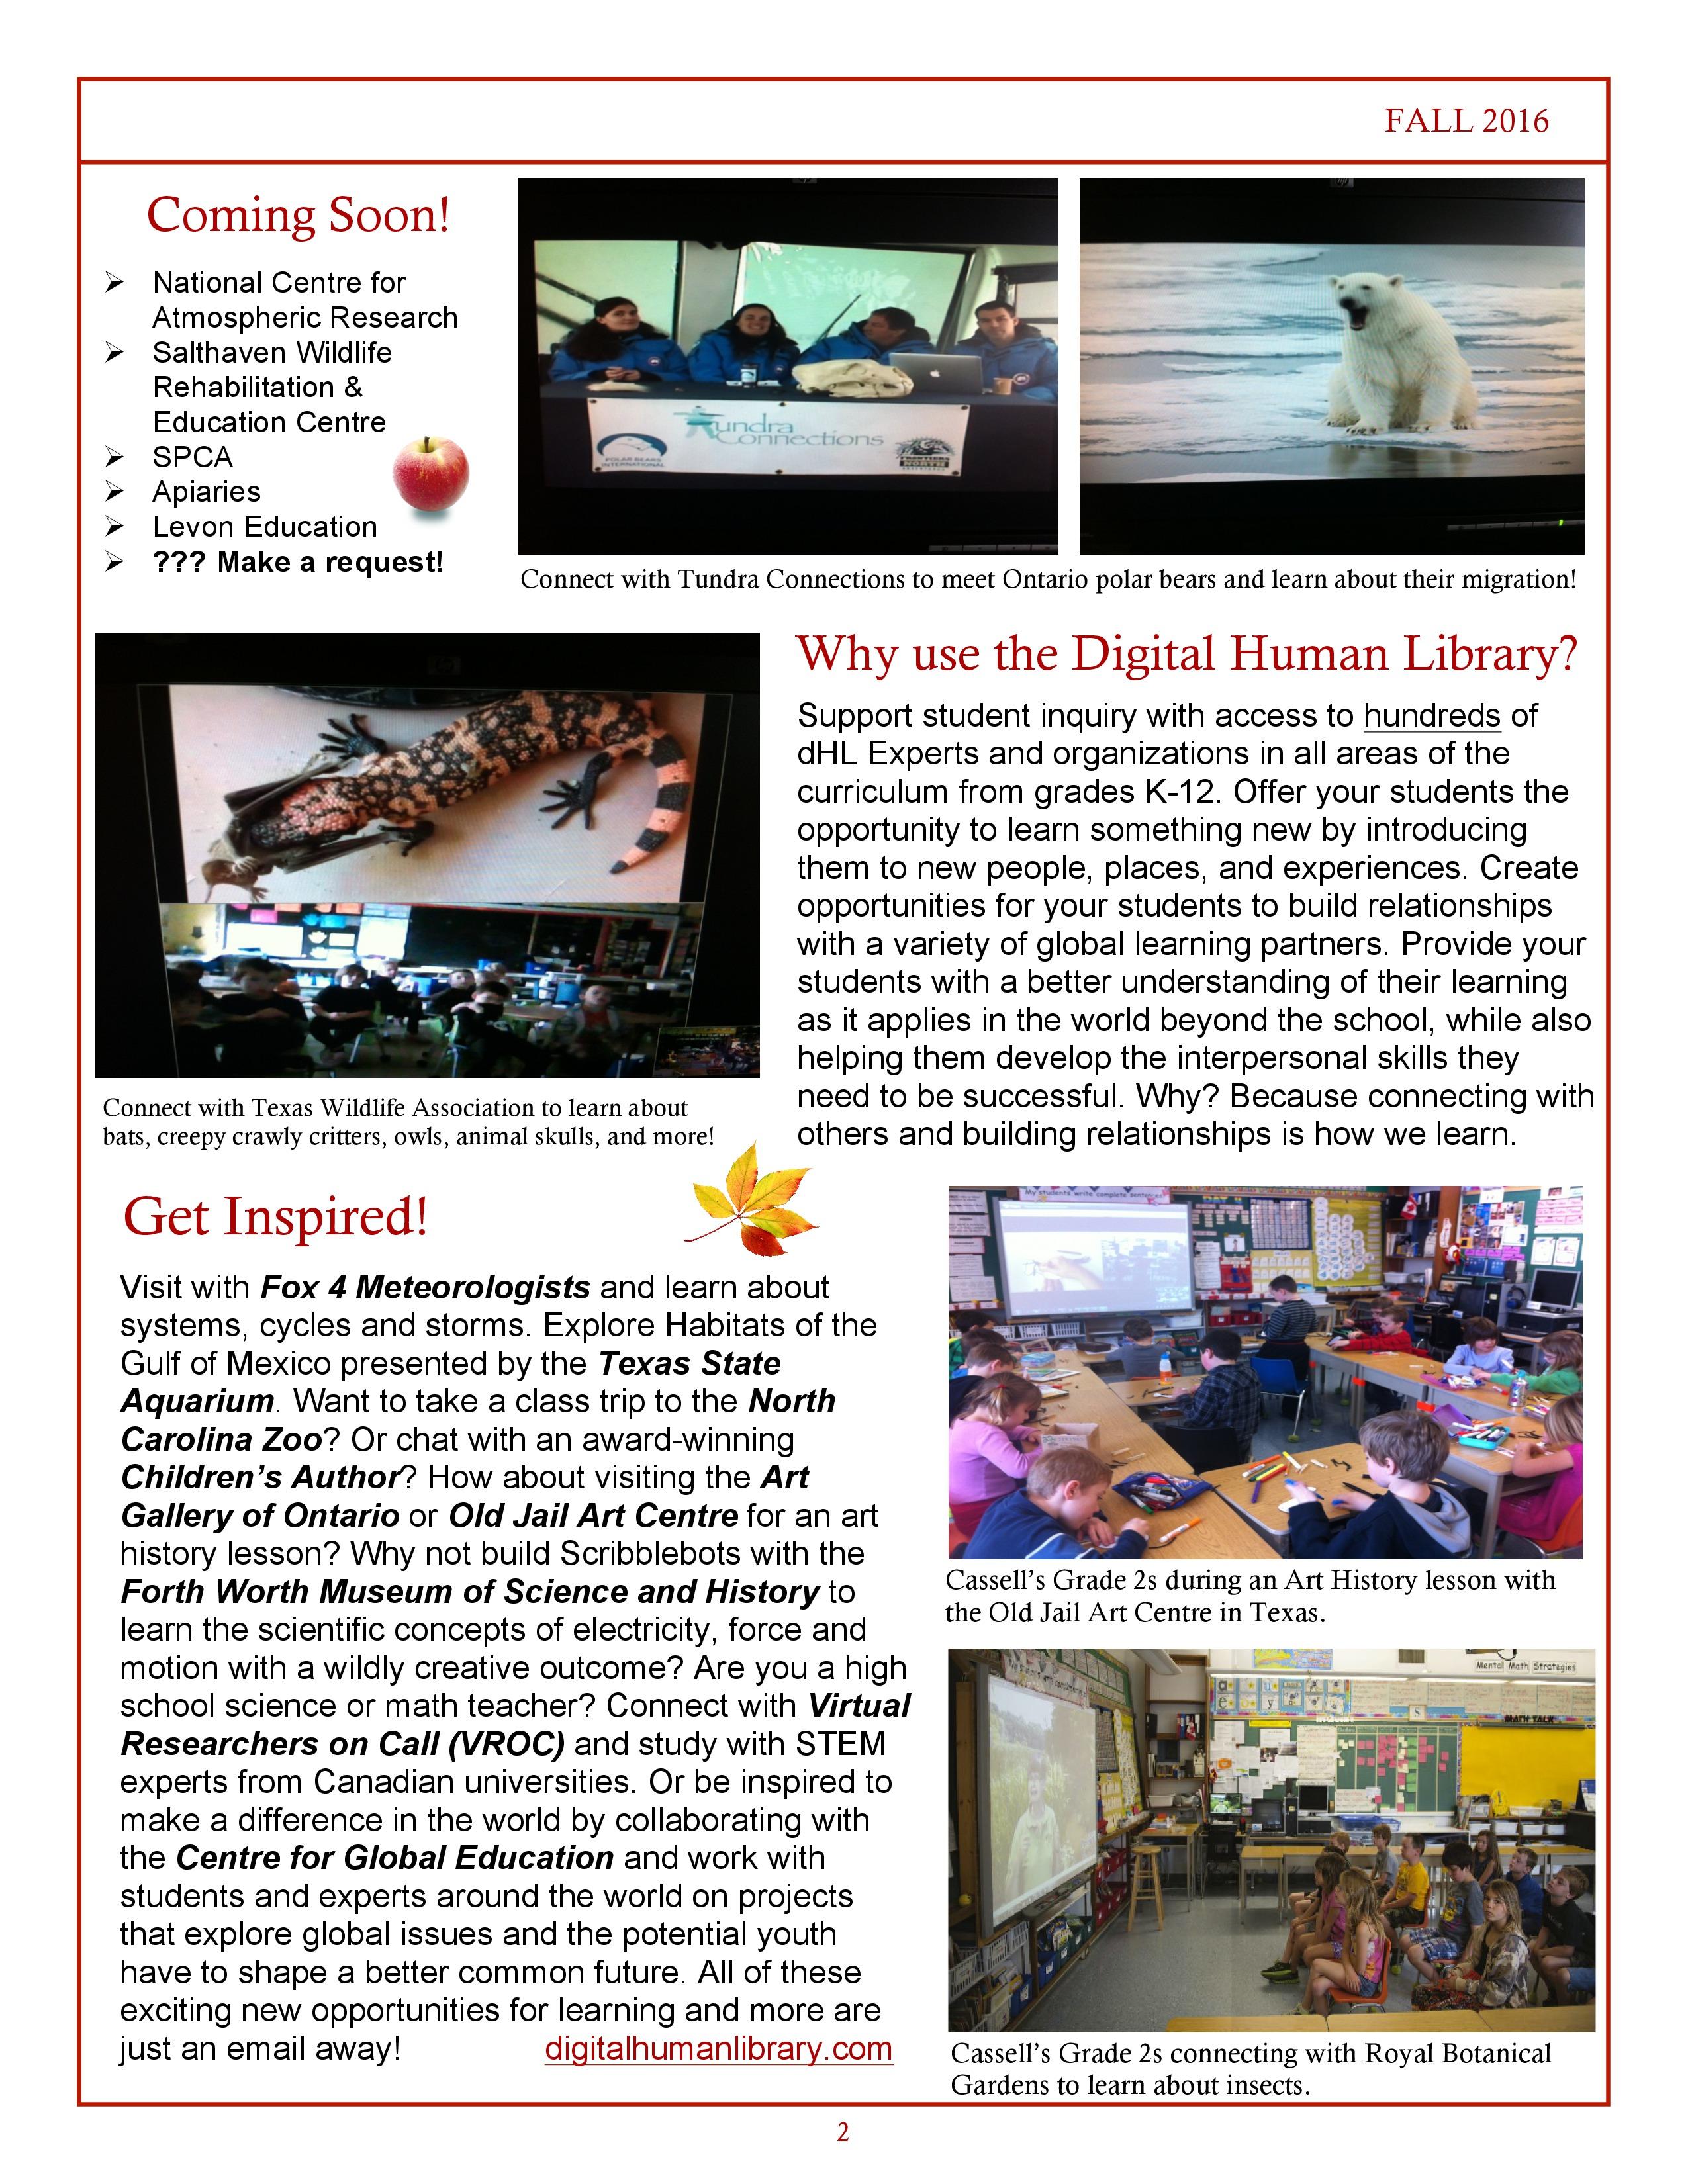 digital-human-library-september-newsletter_fall_2016-page-1-1